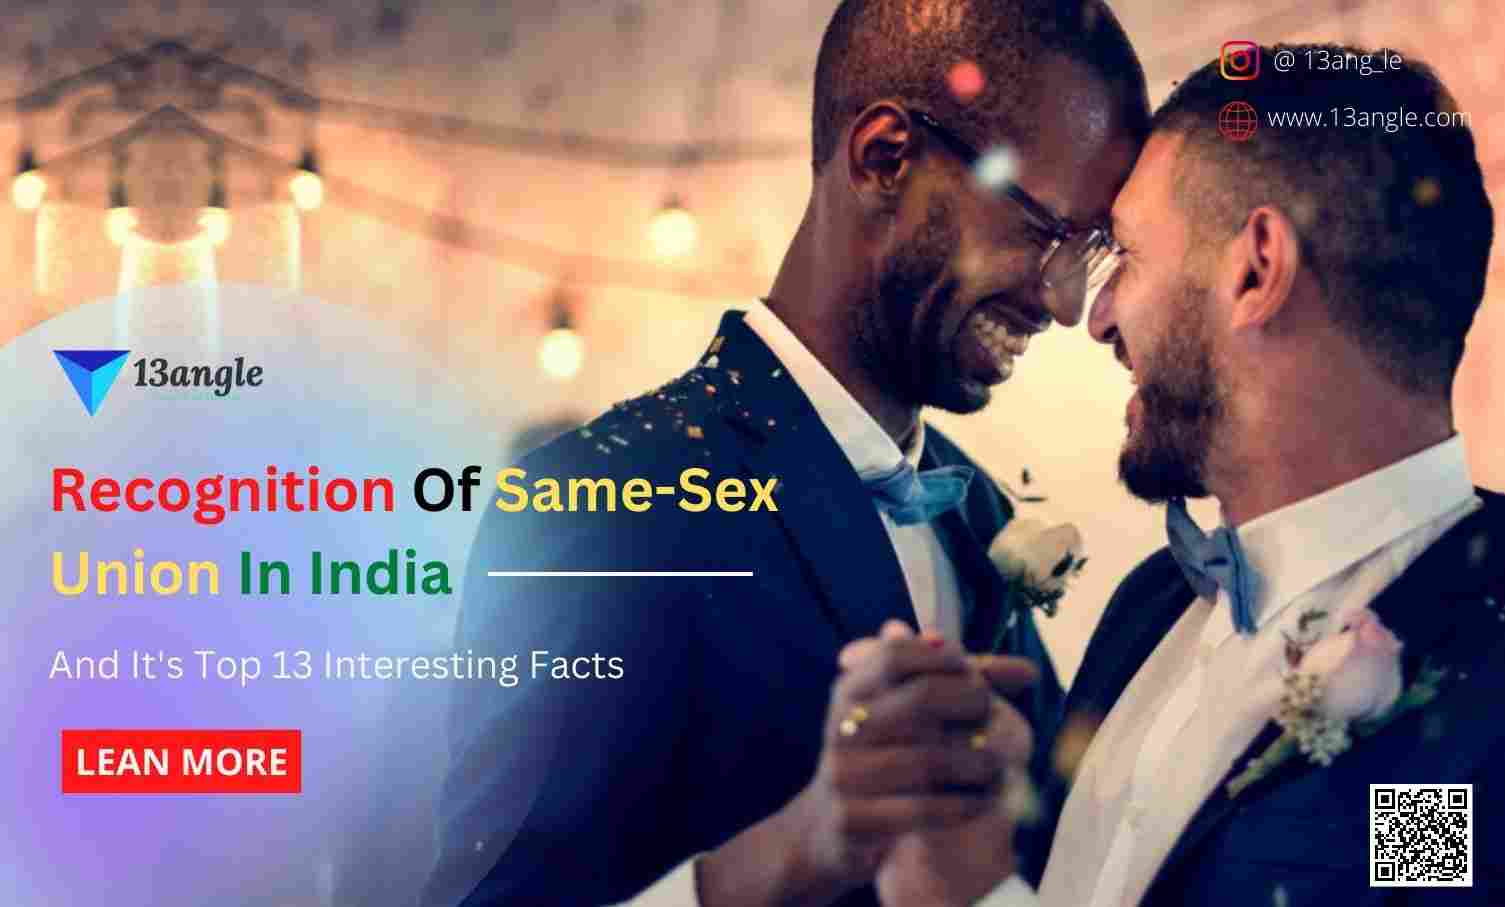 Recognition Of Same-Sex Union In India- 13angle.com